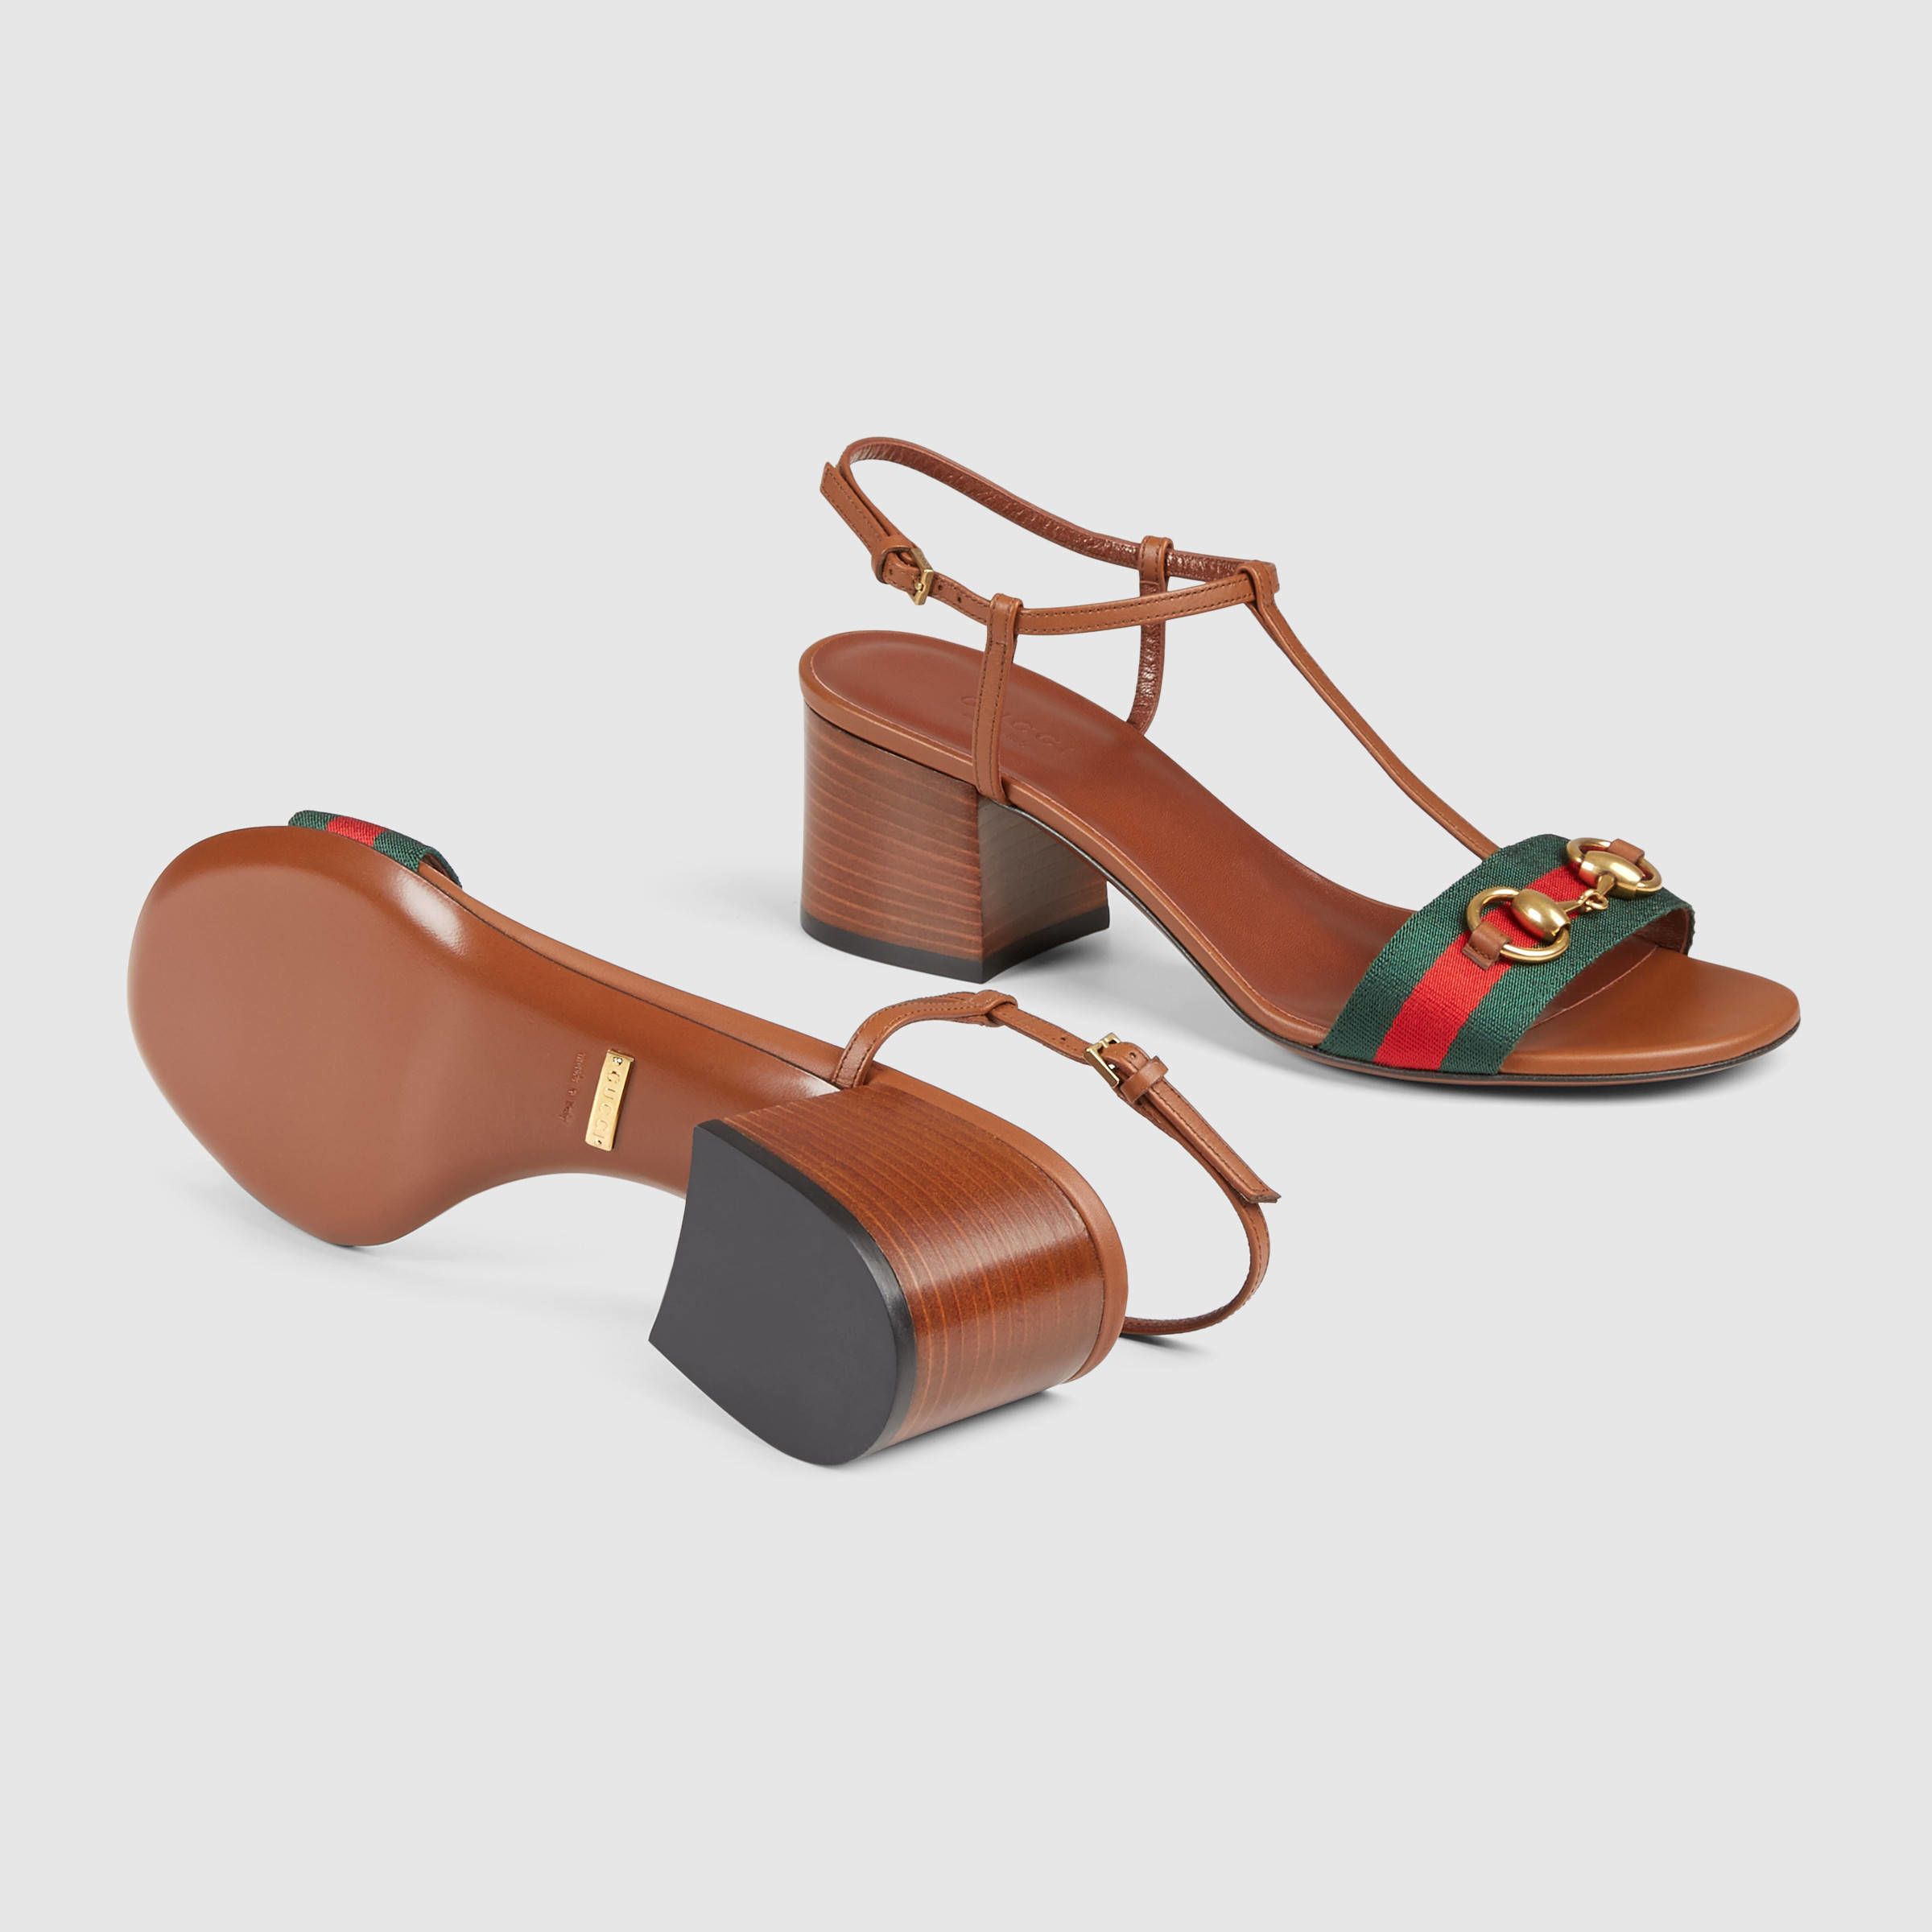 Lyst - Gucci Leather Mid-heel Sandal in Brown